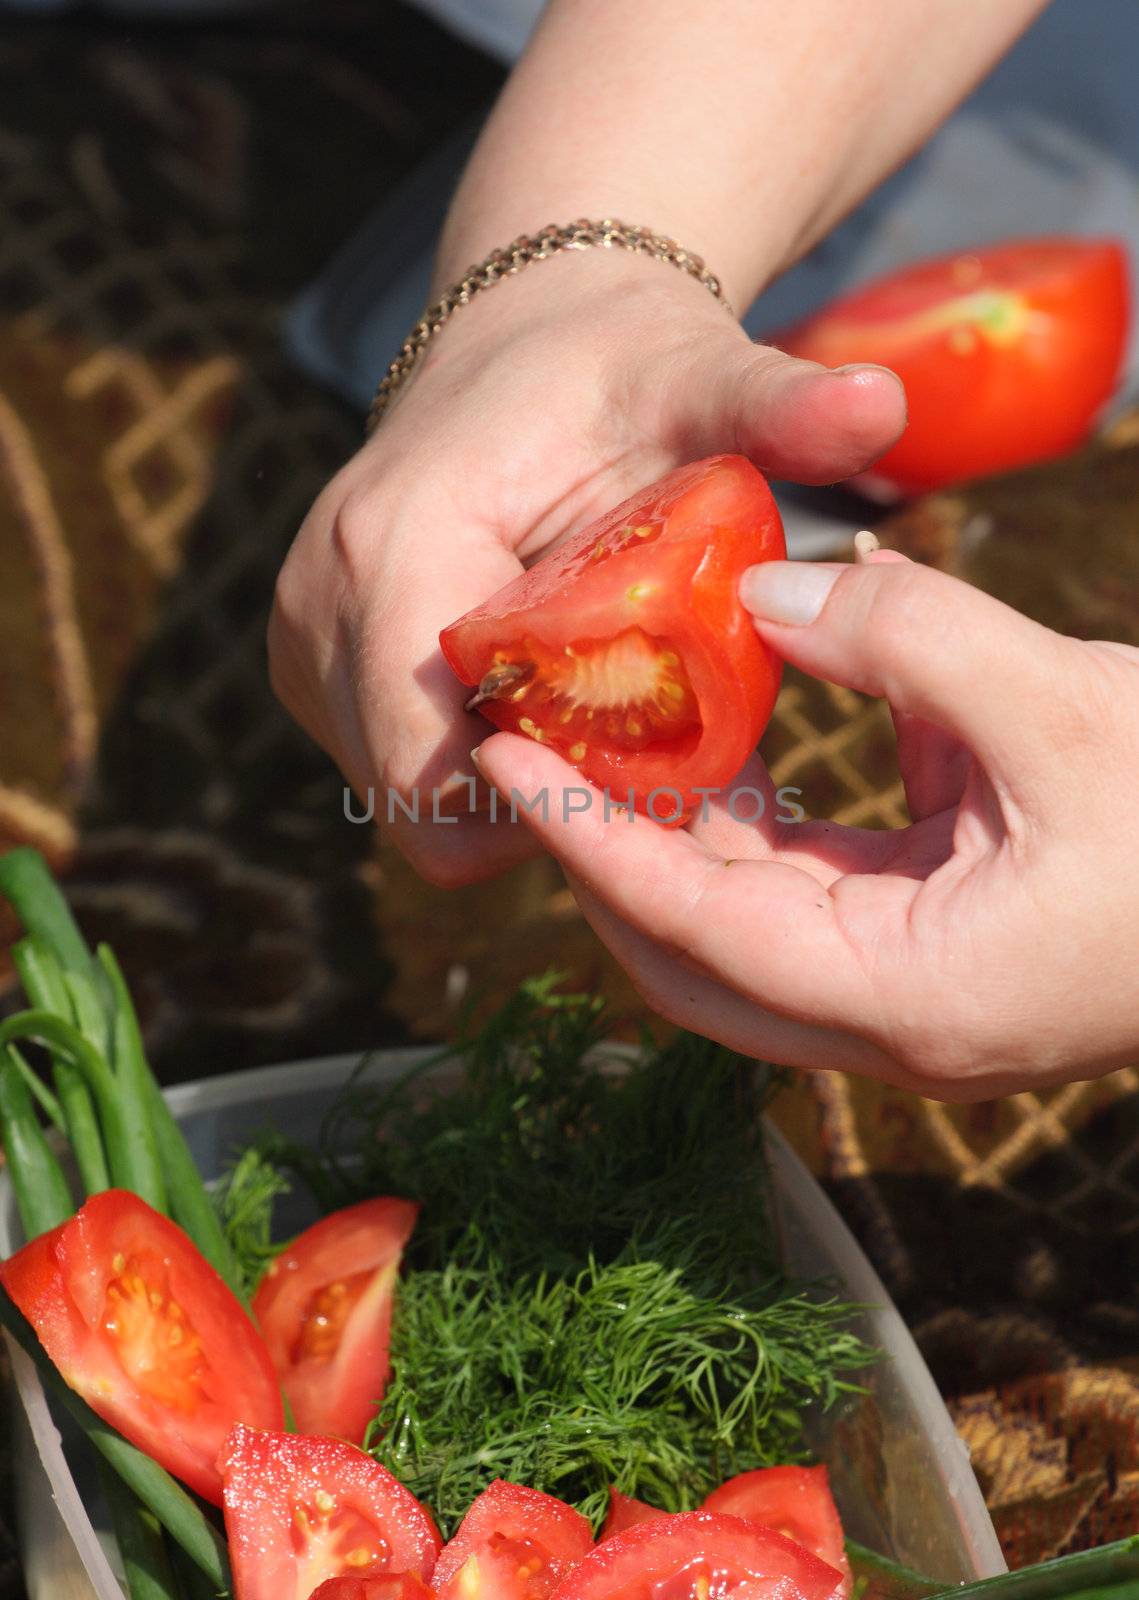 Tomato, vegetable, hand, knife, onion, plate, picnic, fennel, meal, food, vitamins